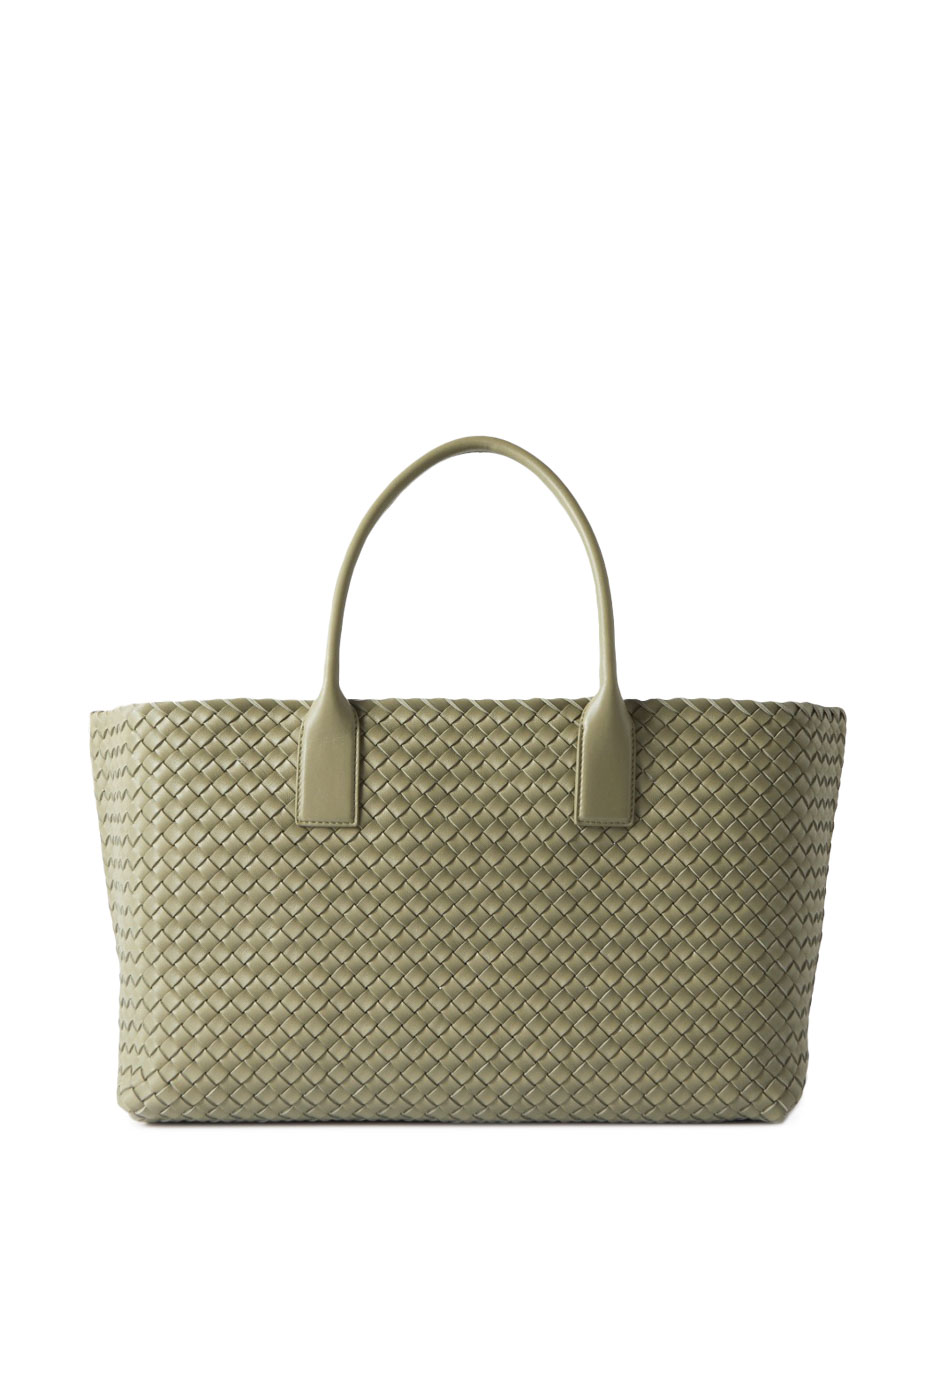 42 Storing My To Do Lists, Sunglasses, Wallet, And More In Bottega Veneta's Cabat Medium Intrecciato Leather Tote In Army Green, Net A Porter.com